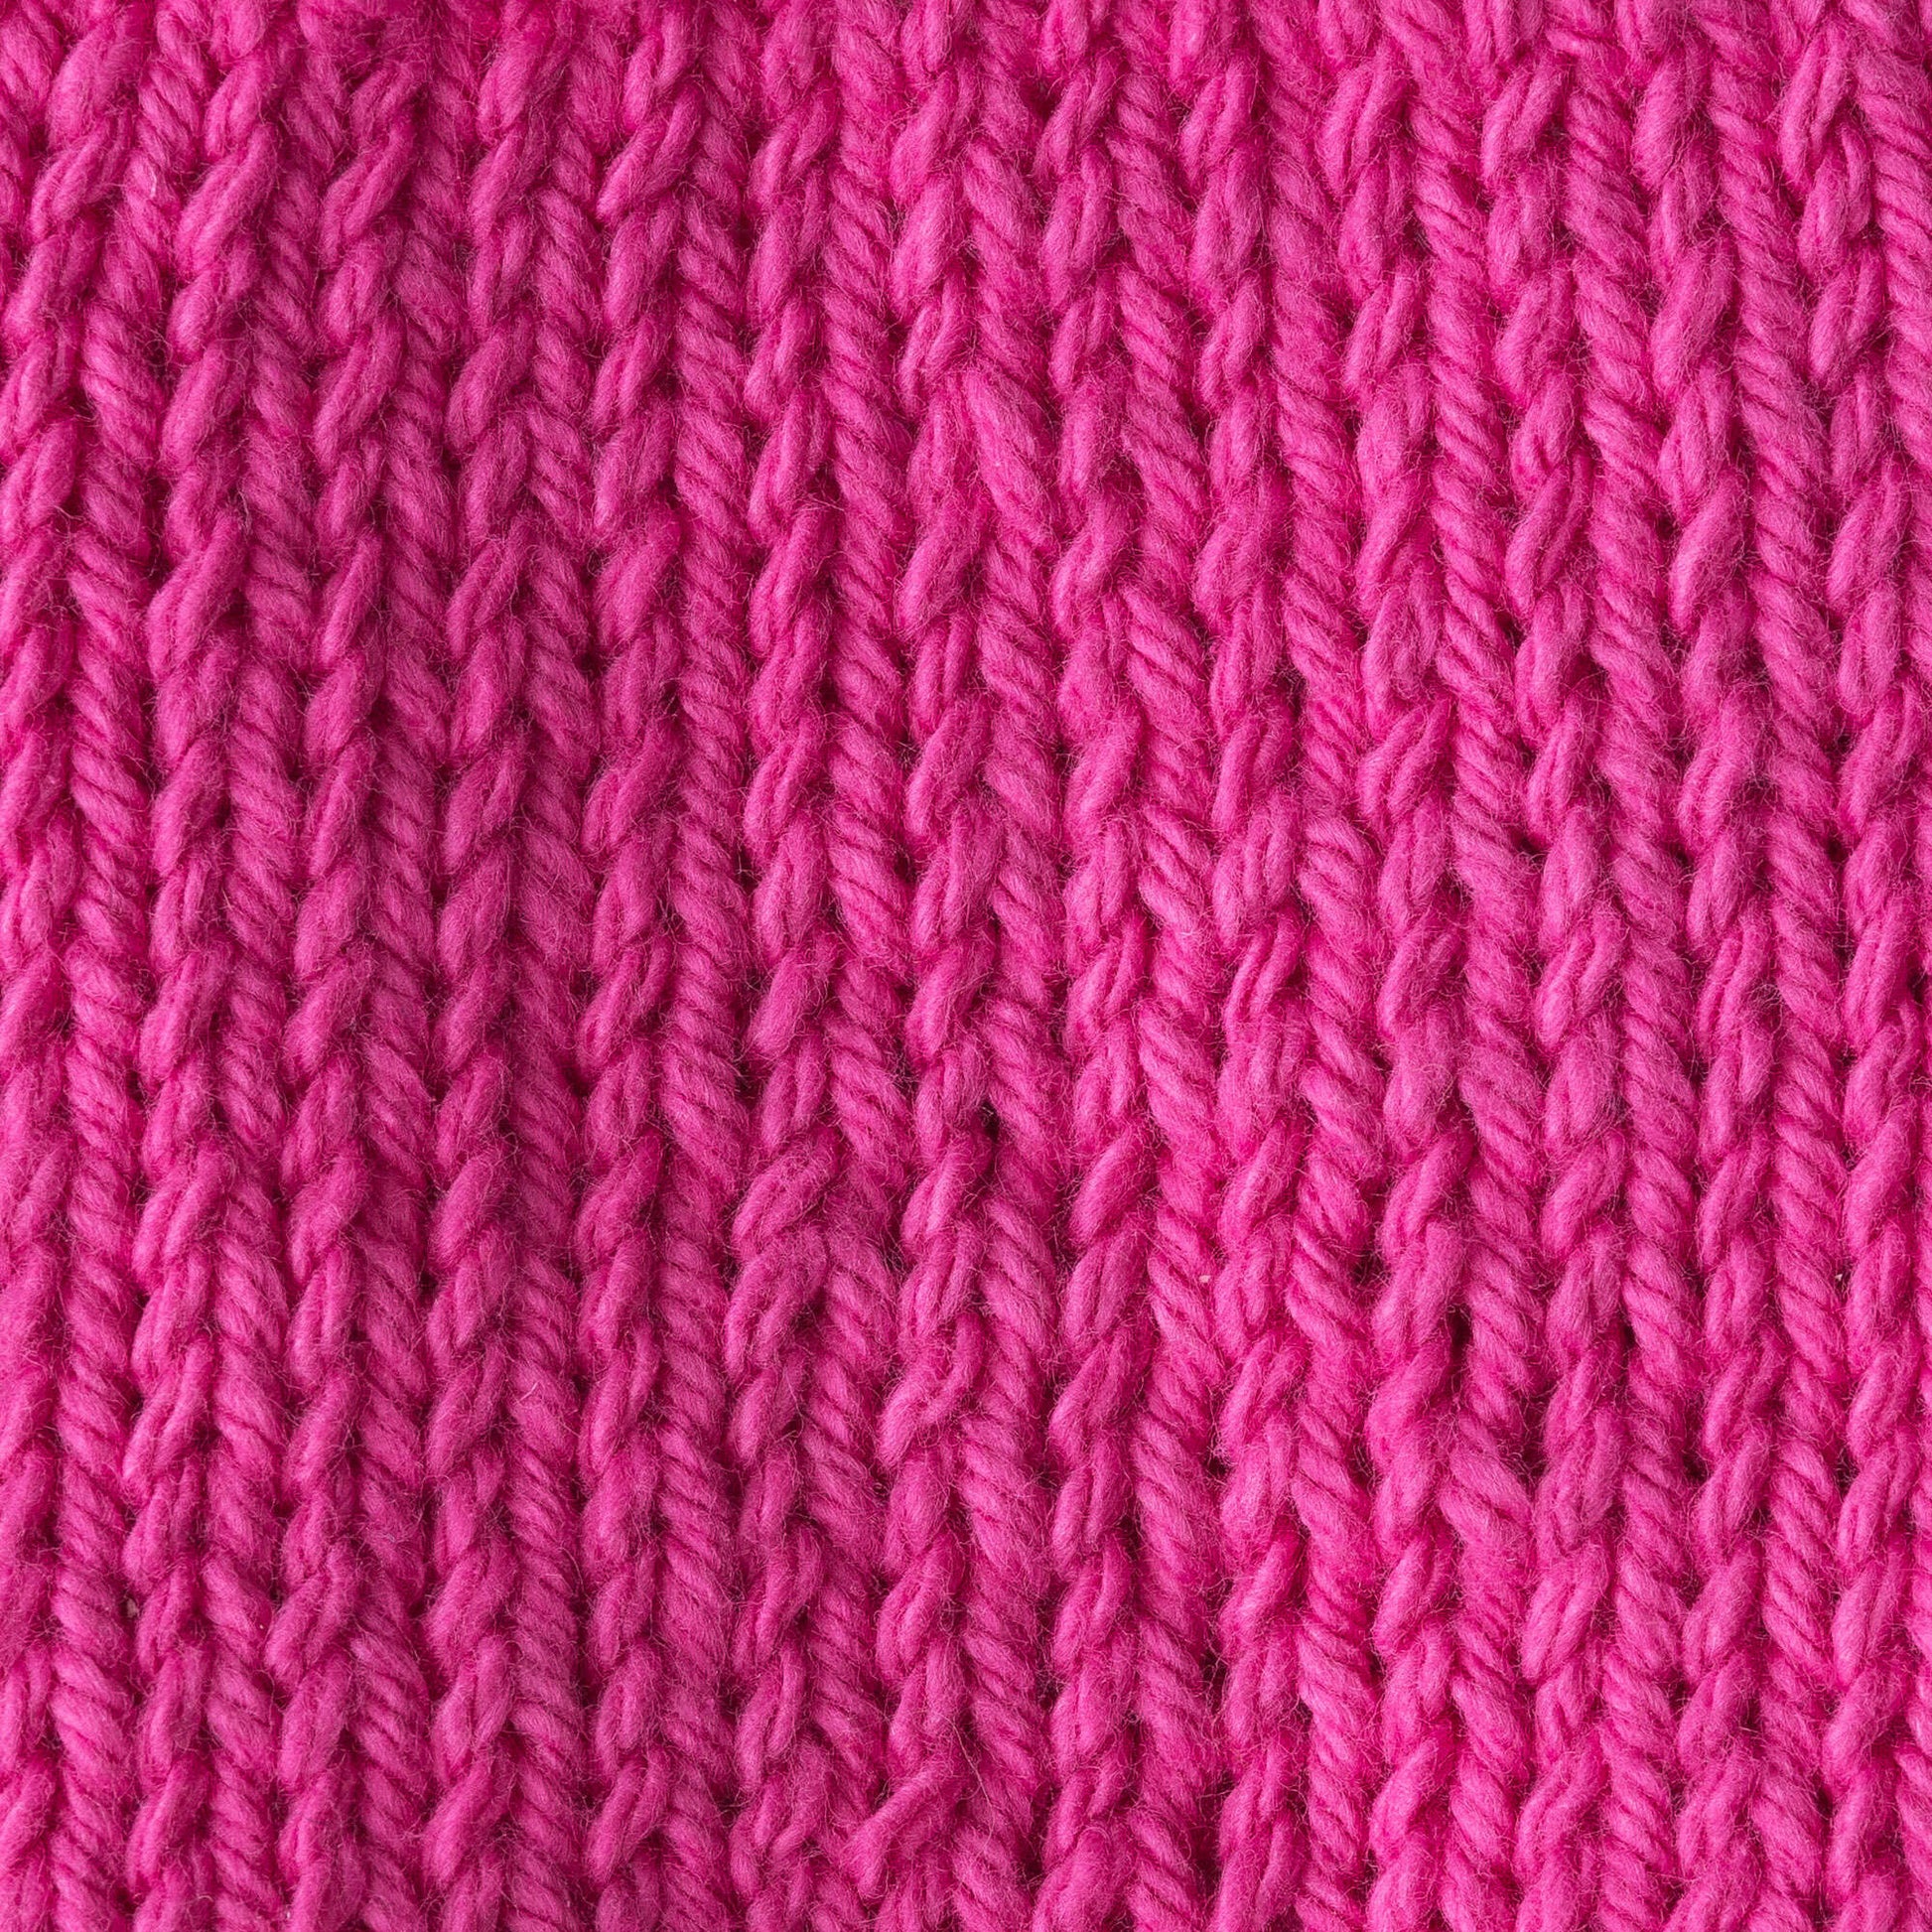 Lily Sugar'n Cream Yarn - Solids Super Size-Rose Pink, 1 count - King  Soopers